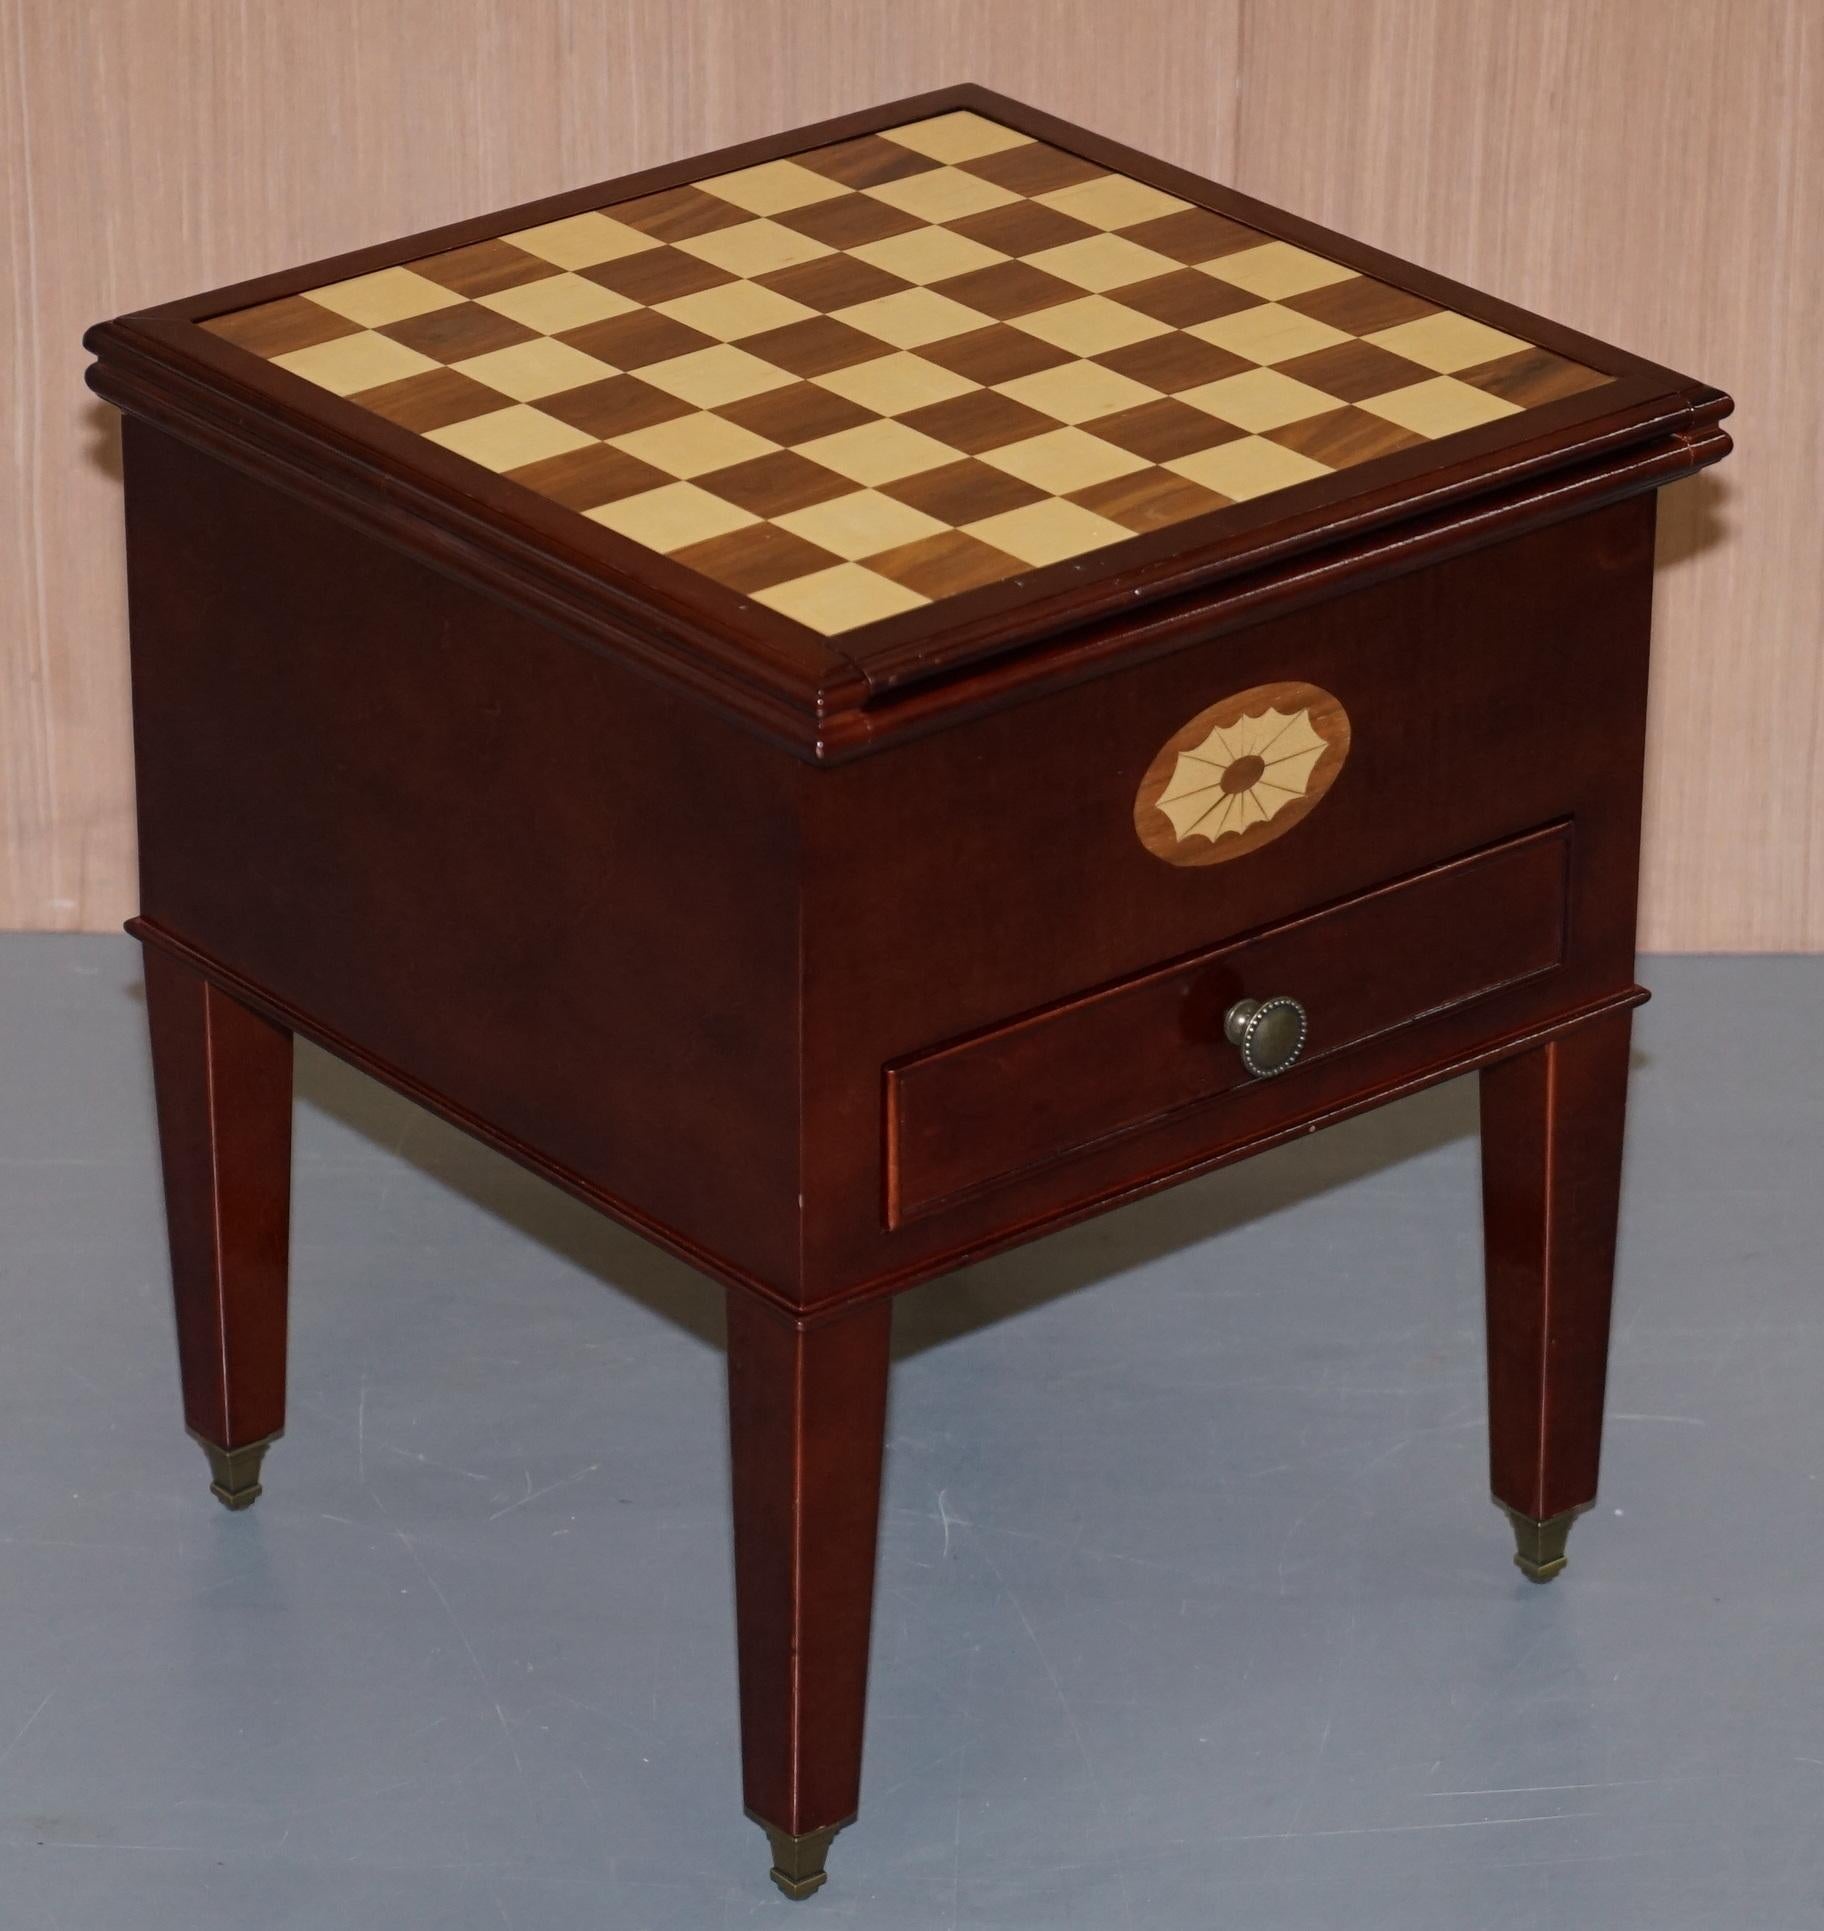 Lovely Small Games Table Metamorphic Chess Backgammon Board Sliding Top 5